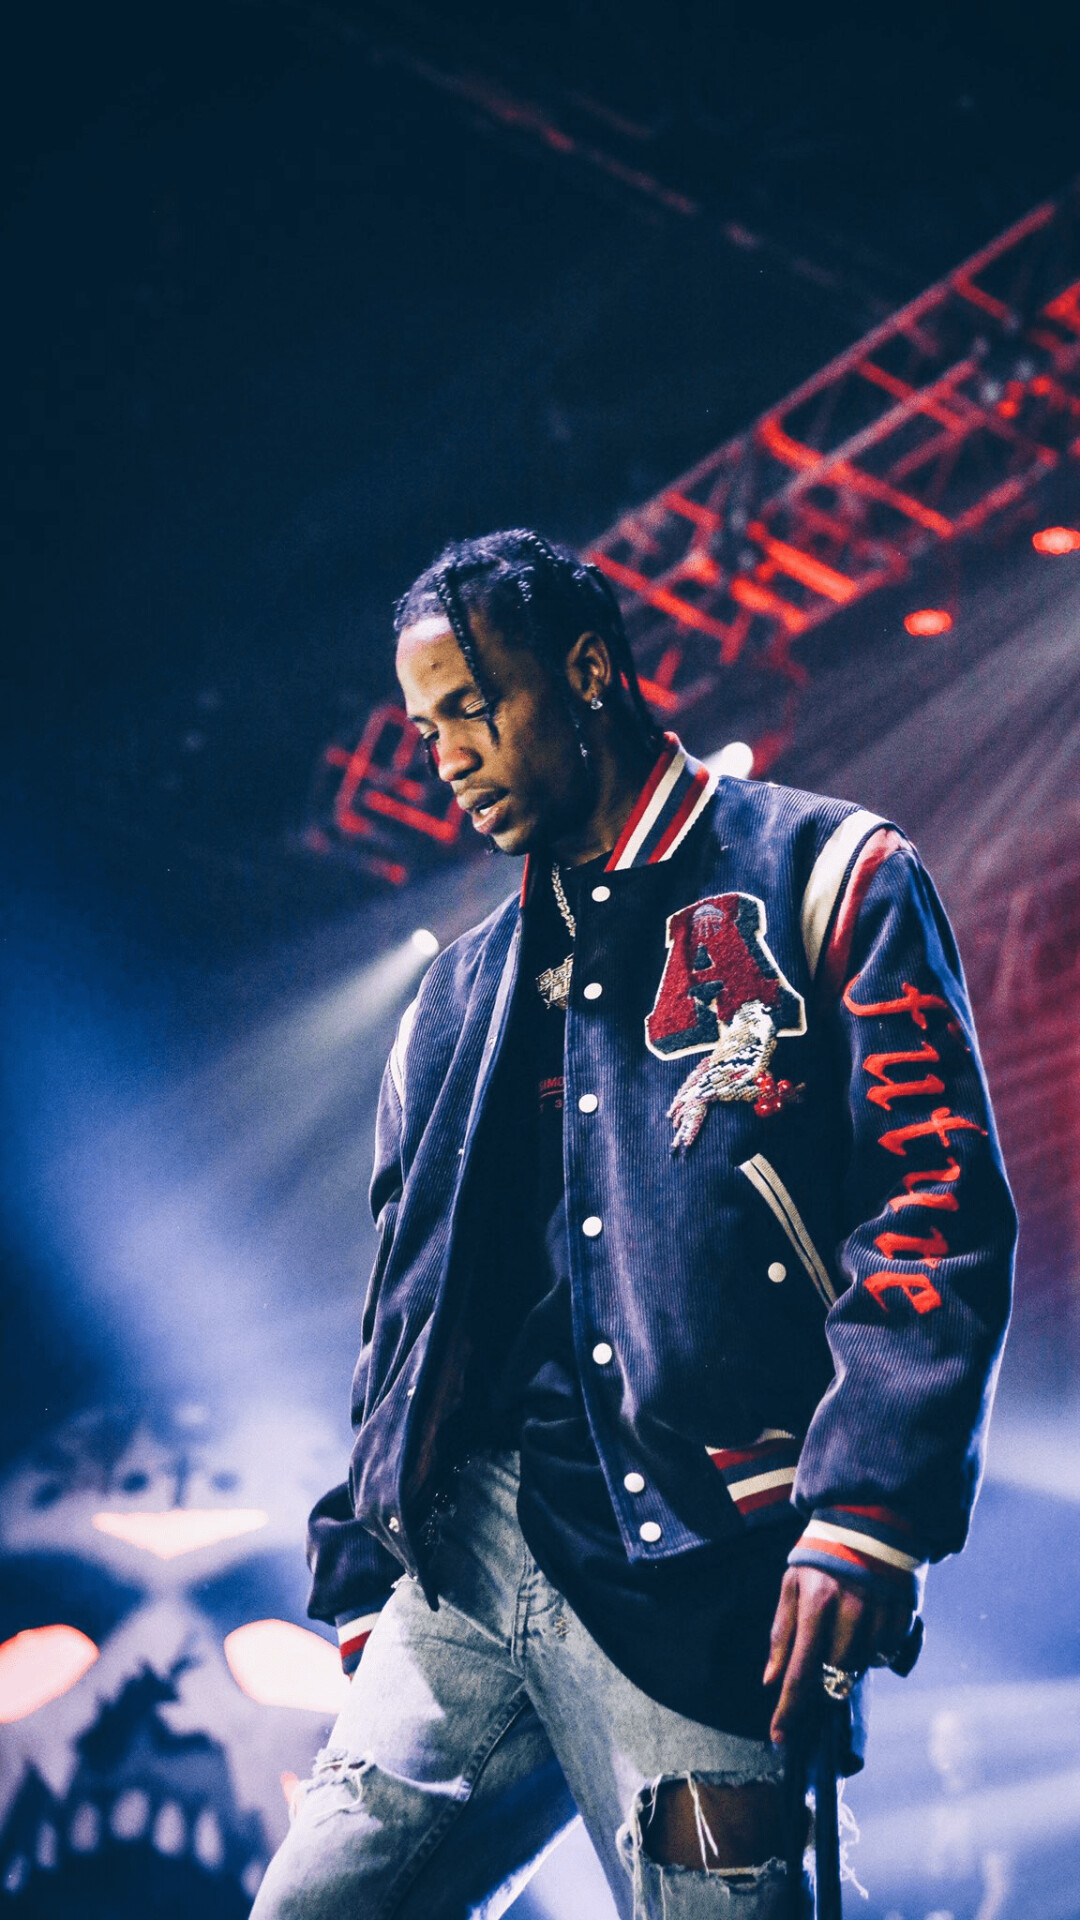 Travis Scott: An American rapper, singer, songwriter, and record producer, Jacques B. Webster. 1080x1920 Full HD Wallpaper.